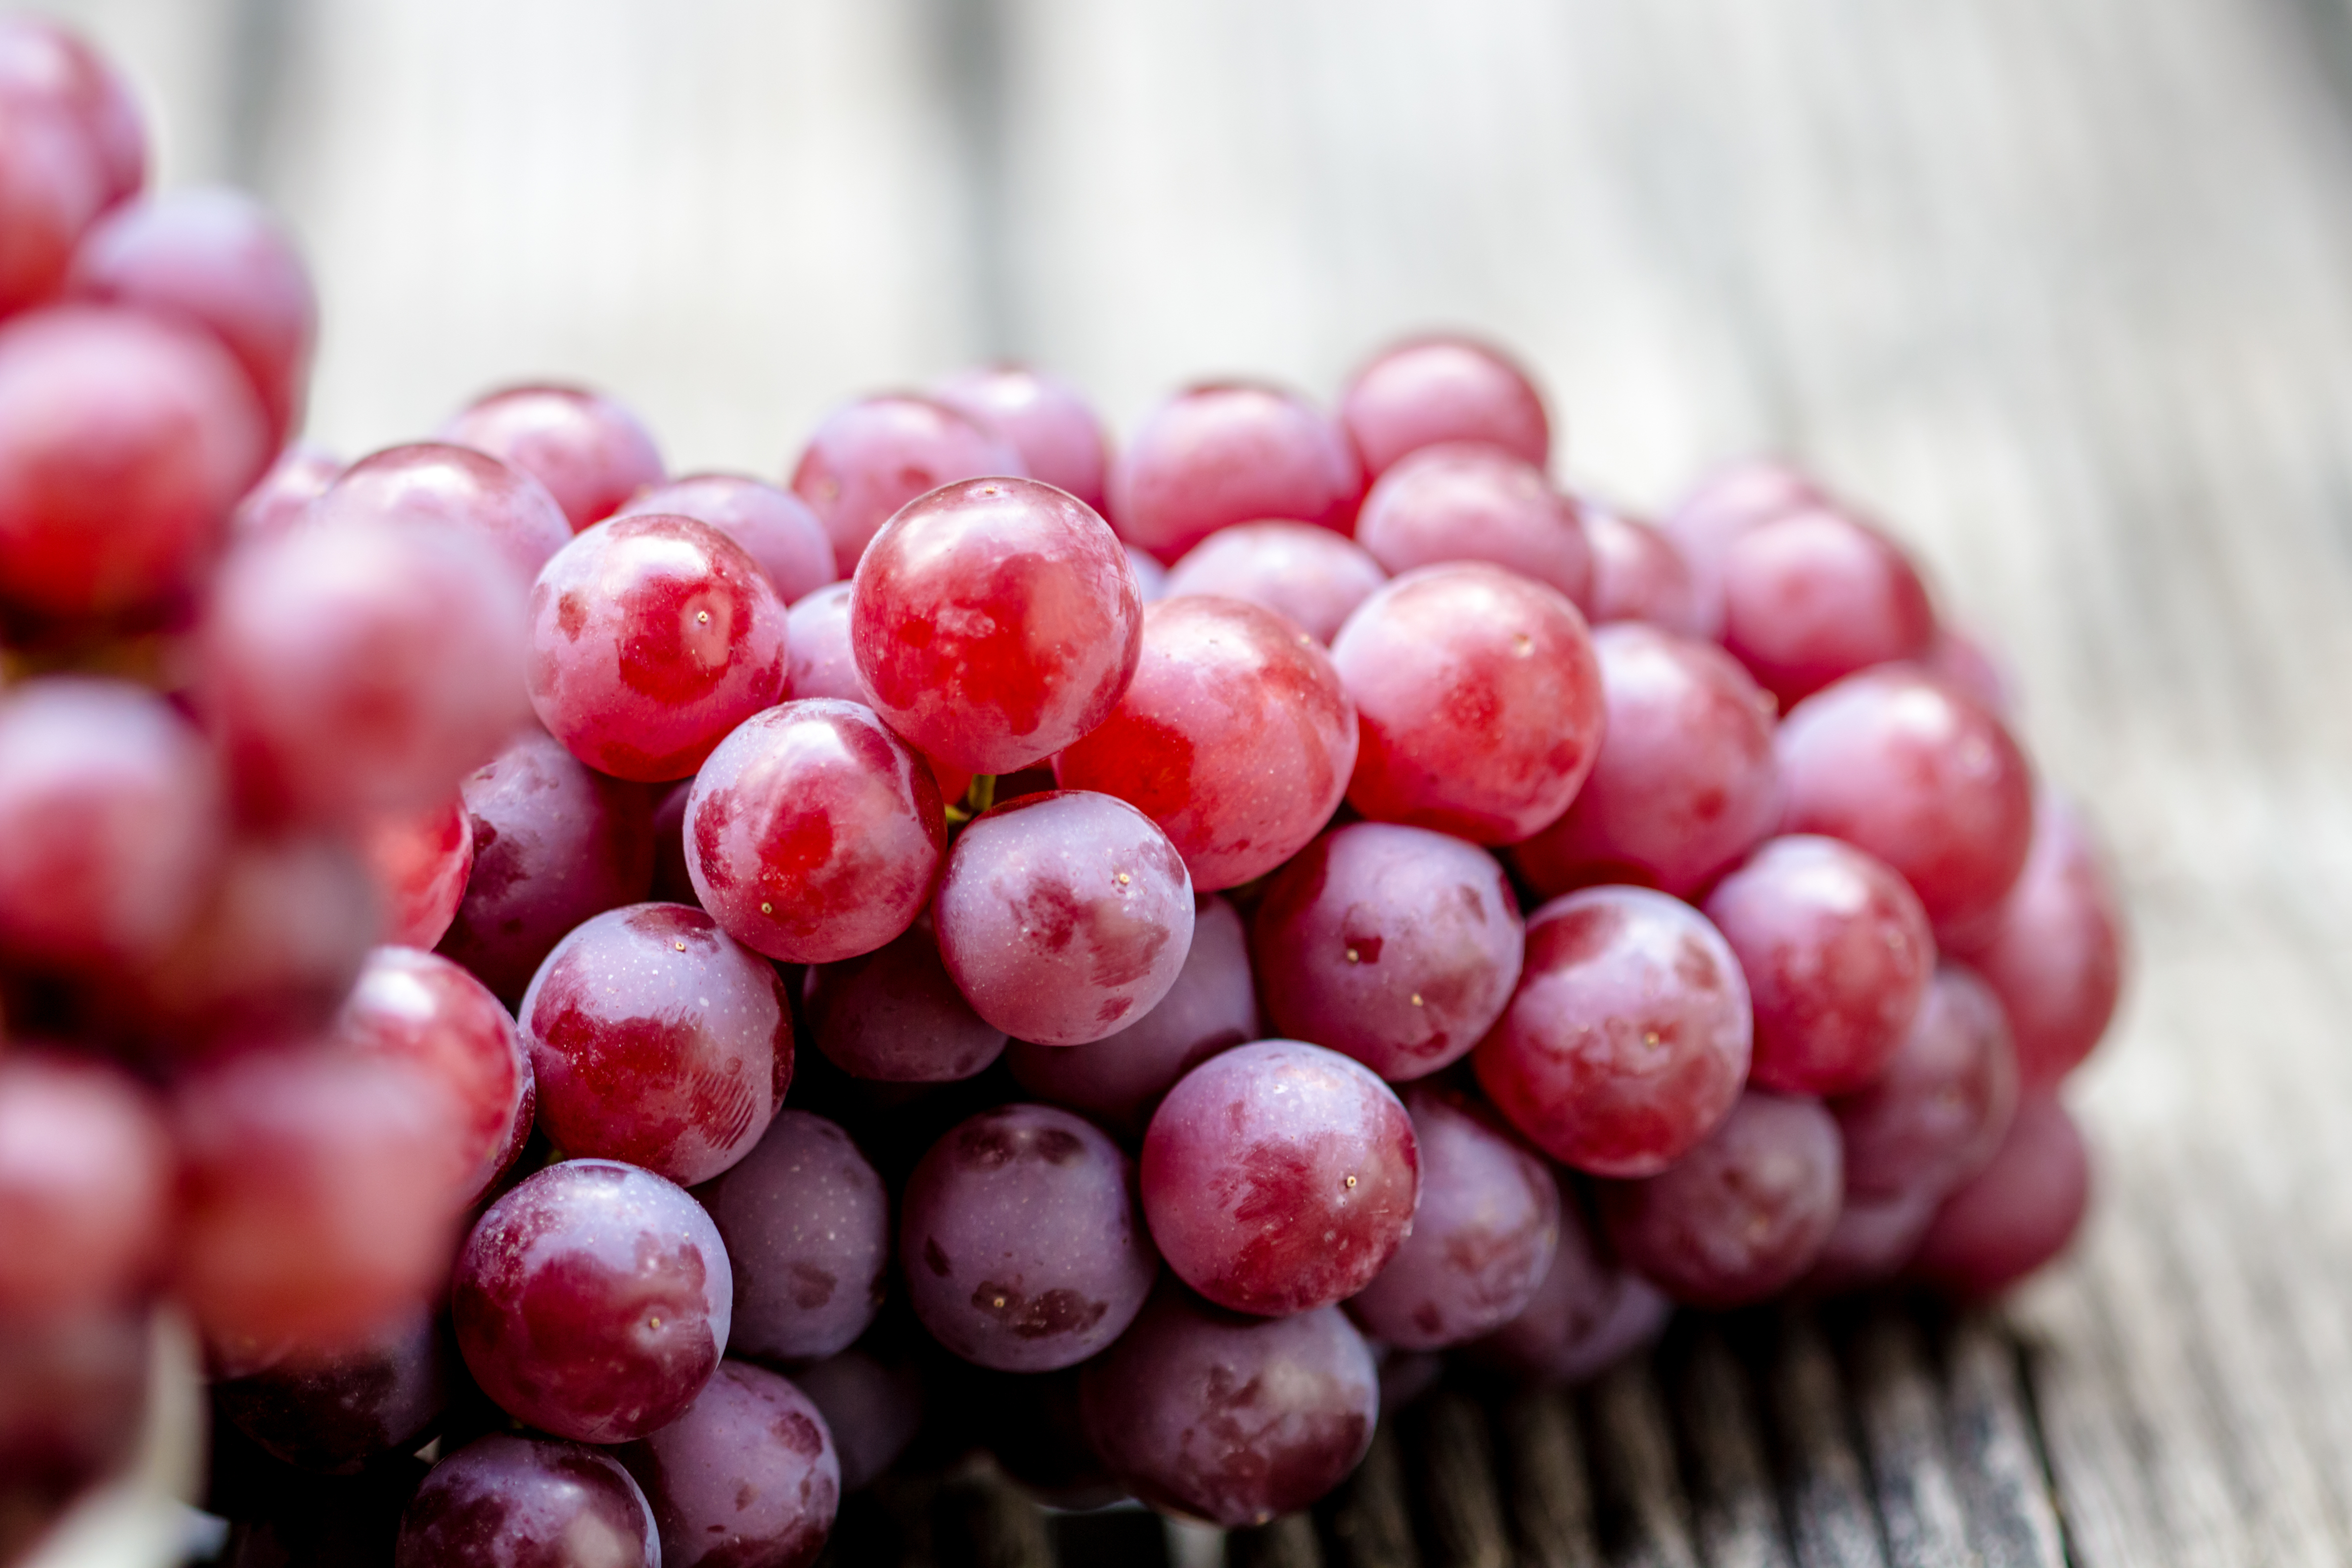 The Sugar Content of Red Seedless Grapes